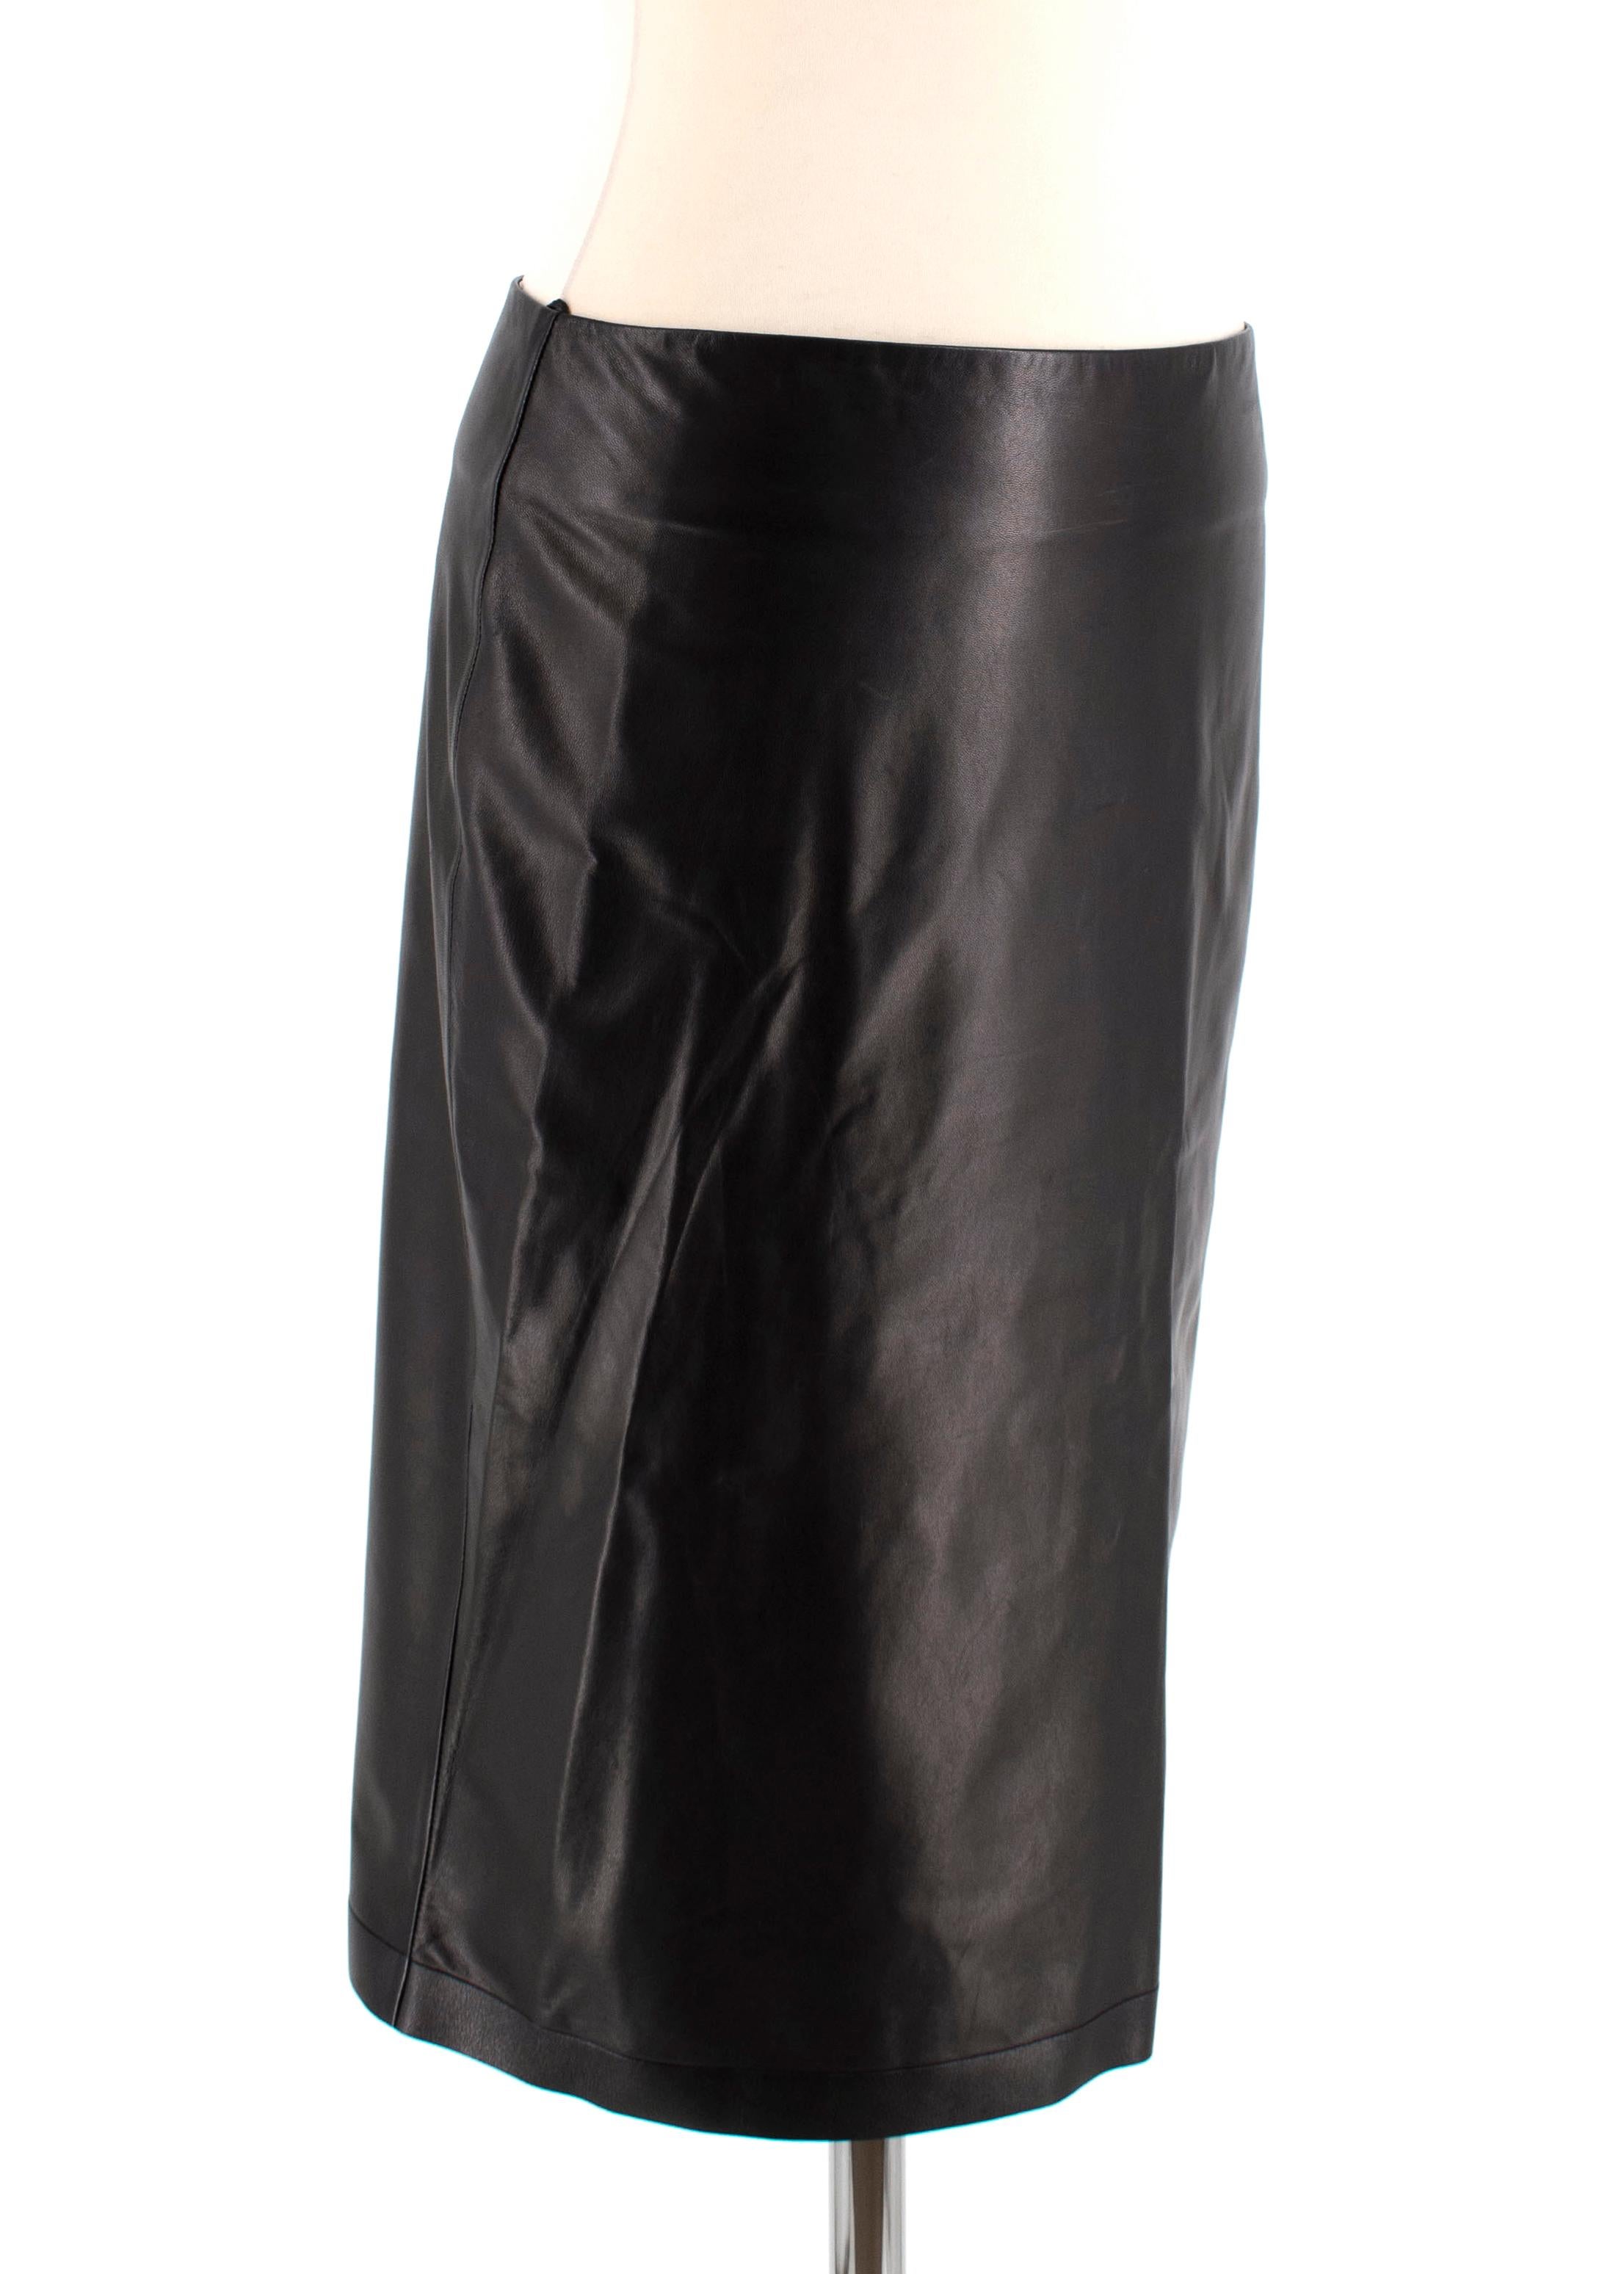 Tom Ford Lambskin Black Pencil Skirt

- Soft lamb skin leather with slight texture
- Straight cut
- Light weight thin leather
- Silk black lining
- Hidden zip fastening at the back
- Slit at the back
- Below the knee length

Made in Italy

Fabric